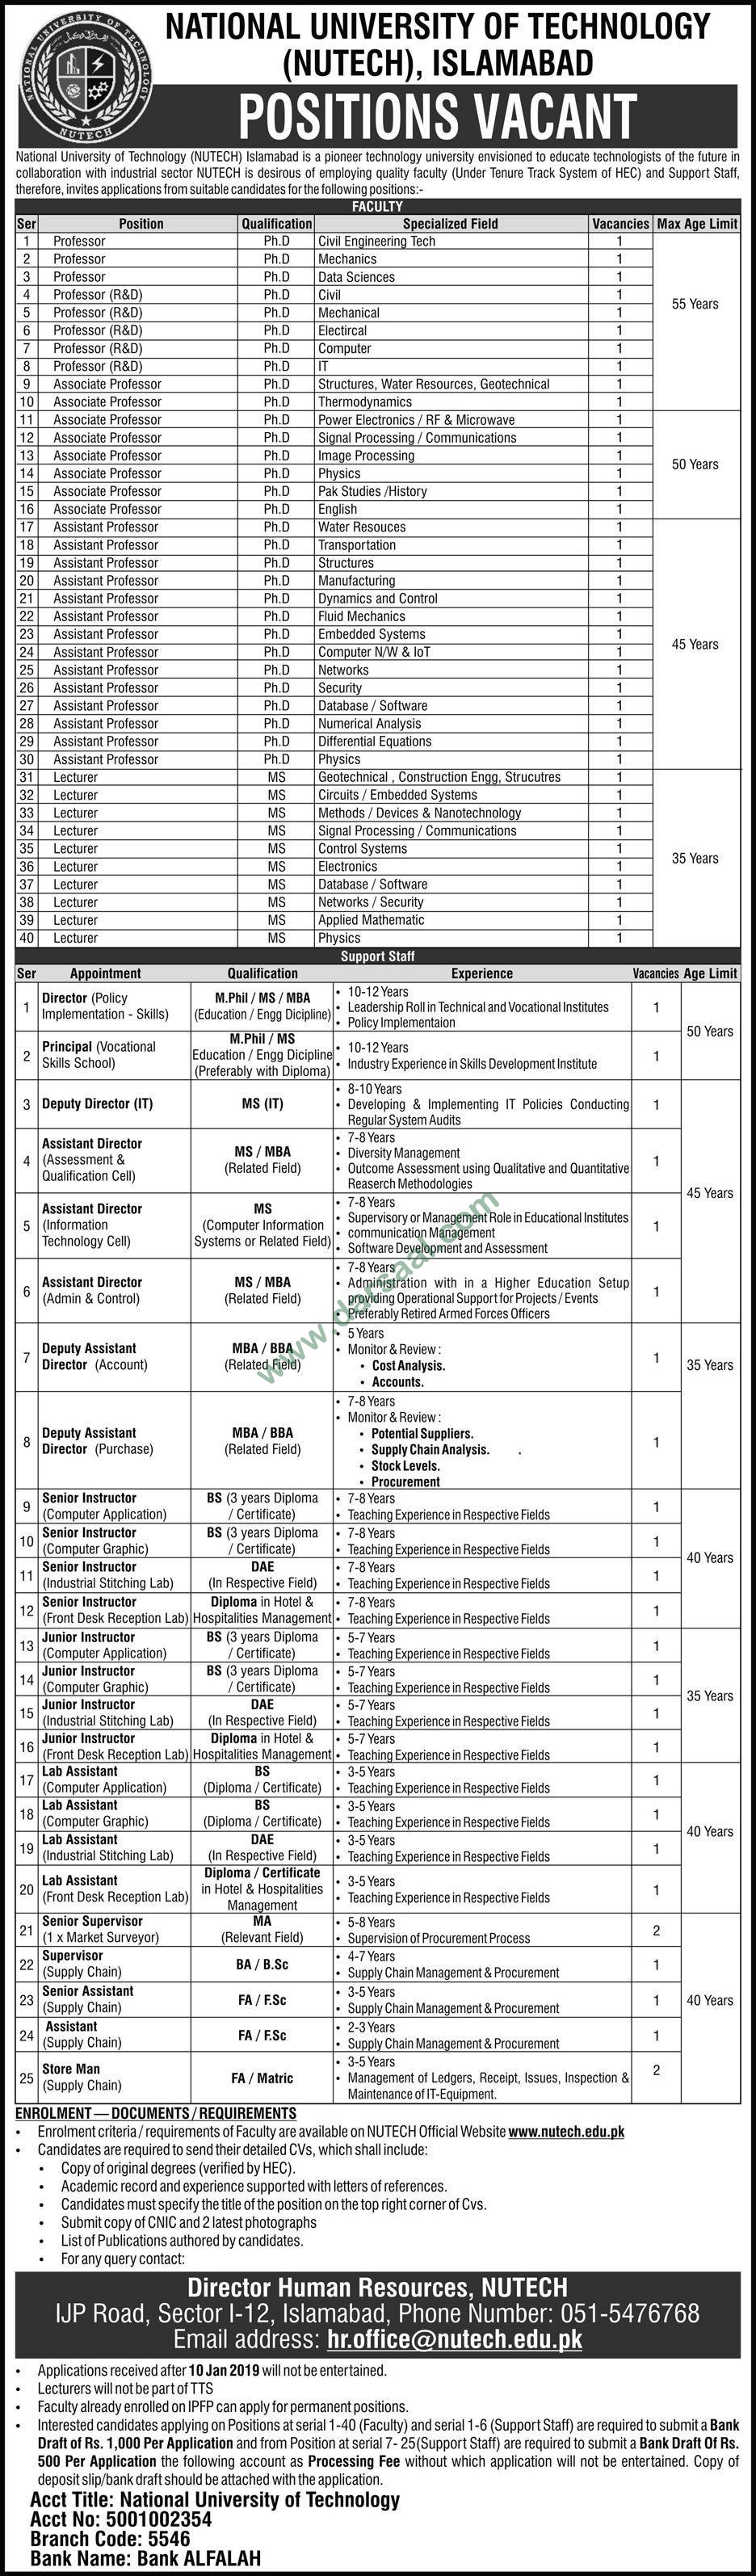 Assistant Director Jobs in National University of Technology in Islamabad - Dec 24, 2018